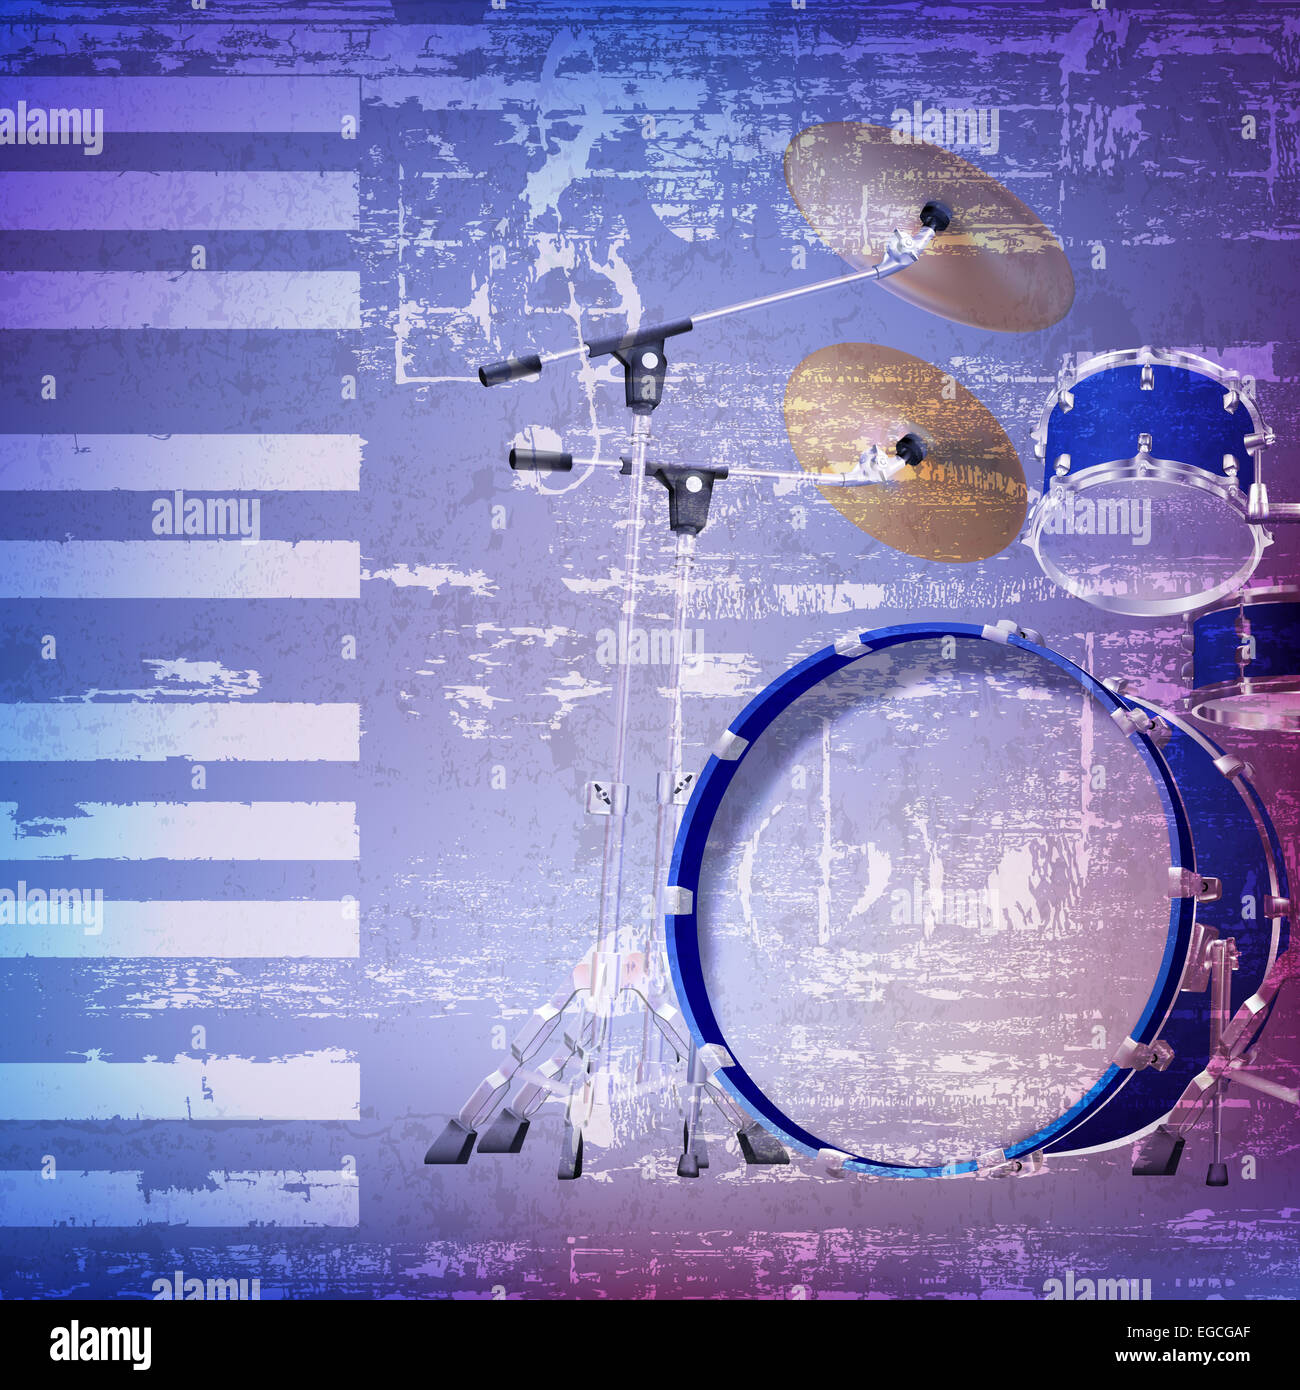 abstract blue grunge background with drum kit Stock Photo